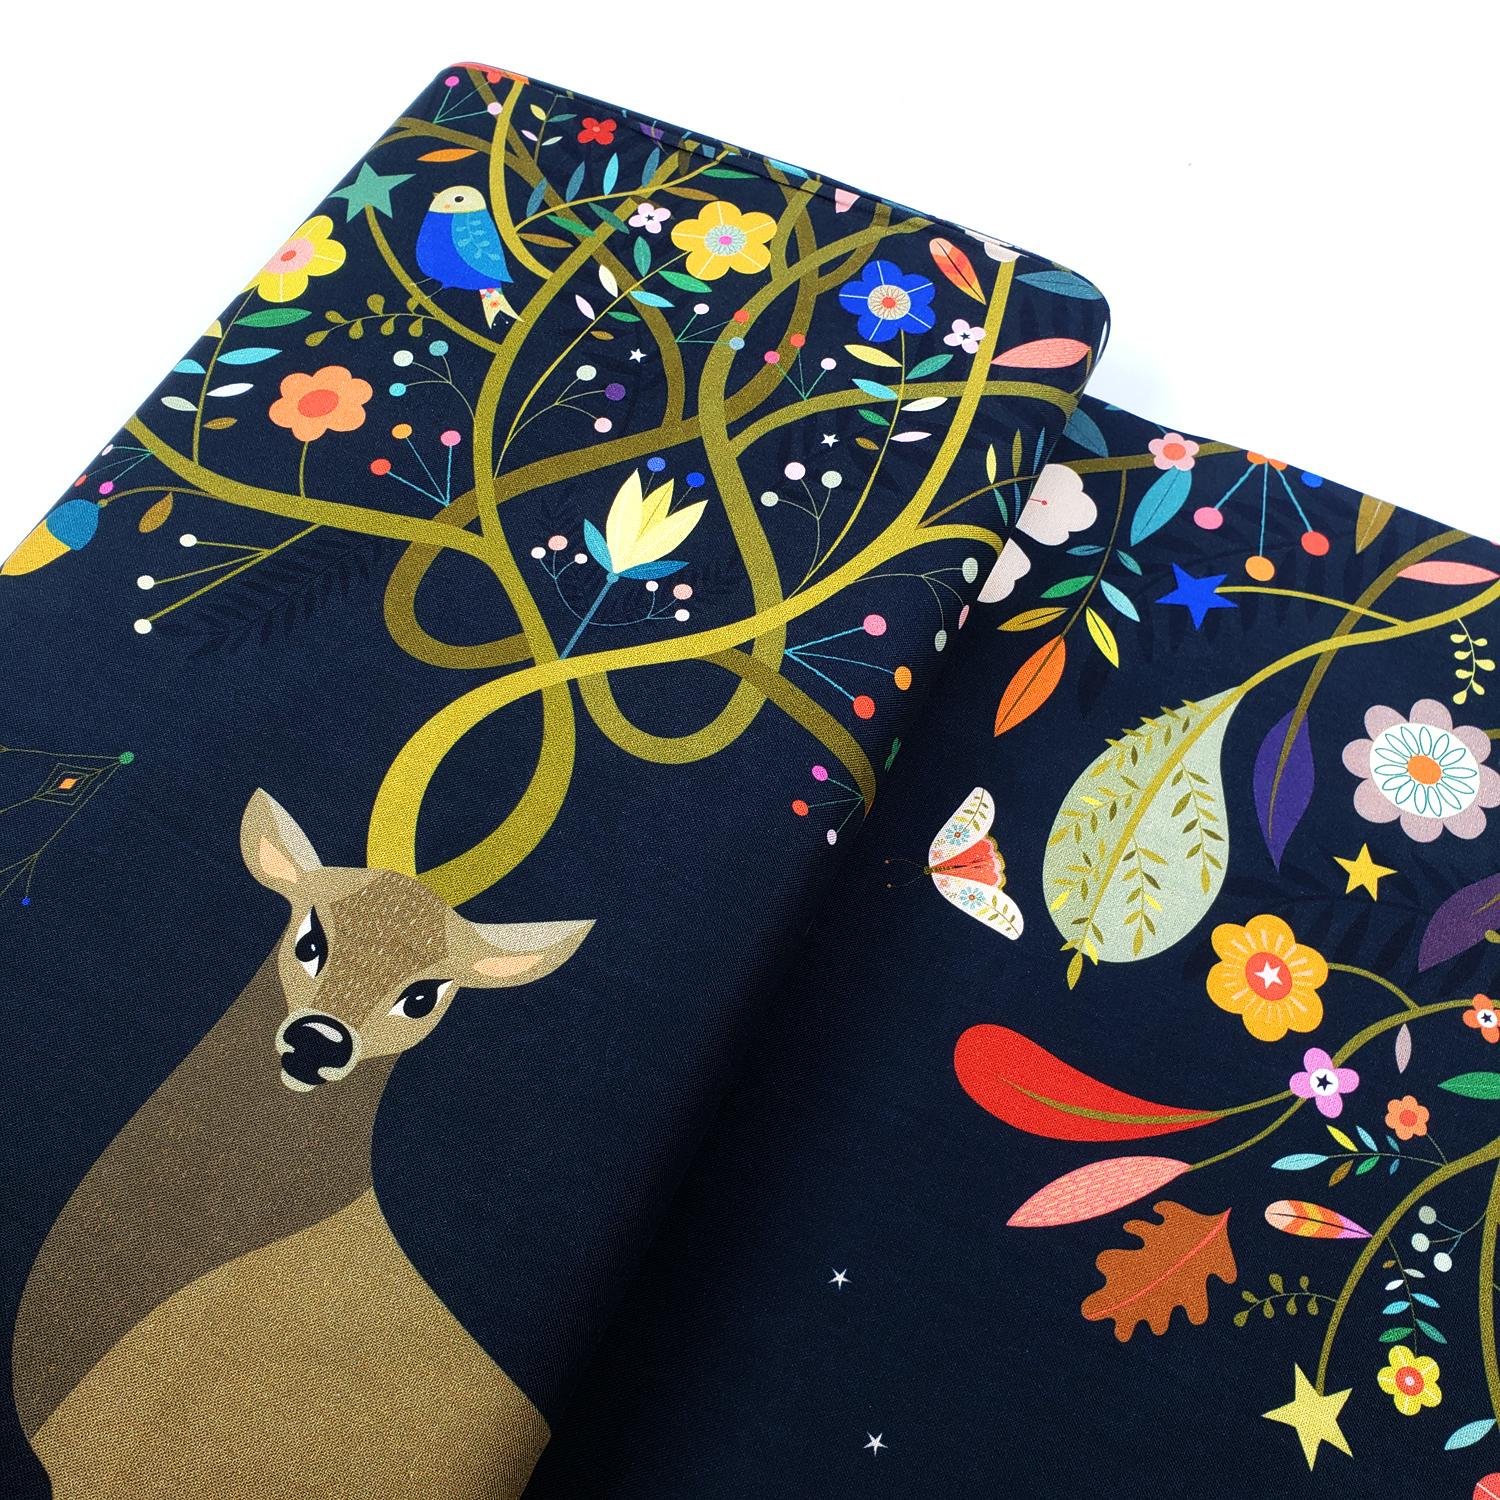 Dashwood,tree of life,stag,antlers,panel,birds,flowers,large,quilt,dress,gold,black,cotton